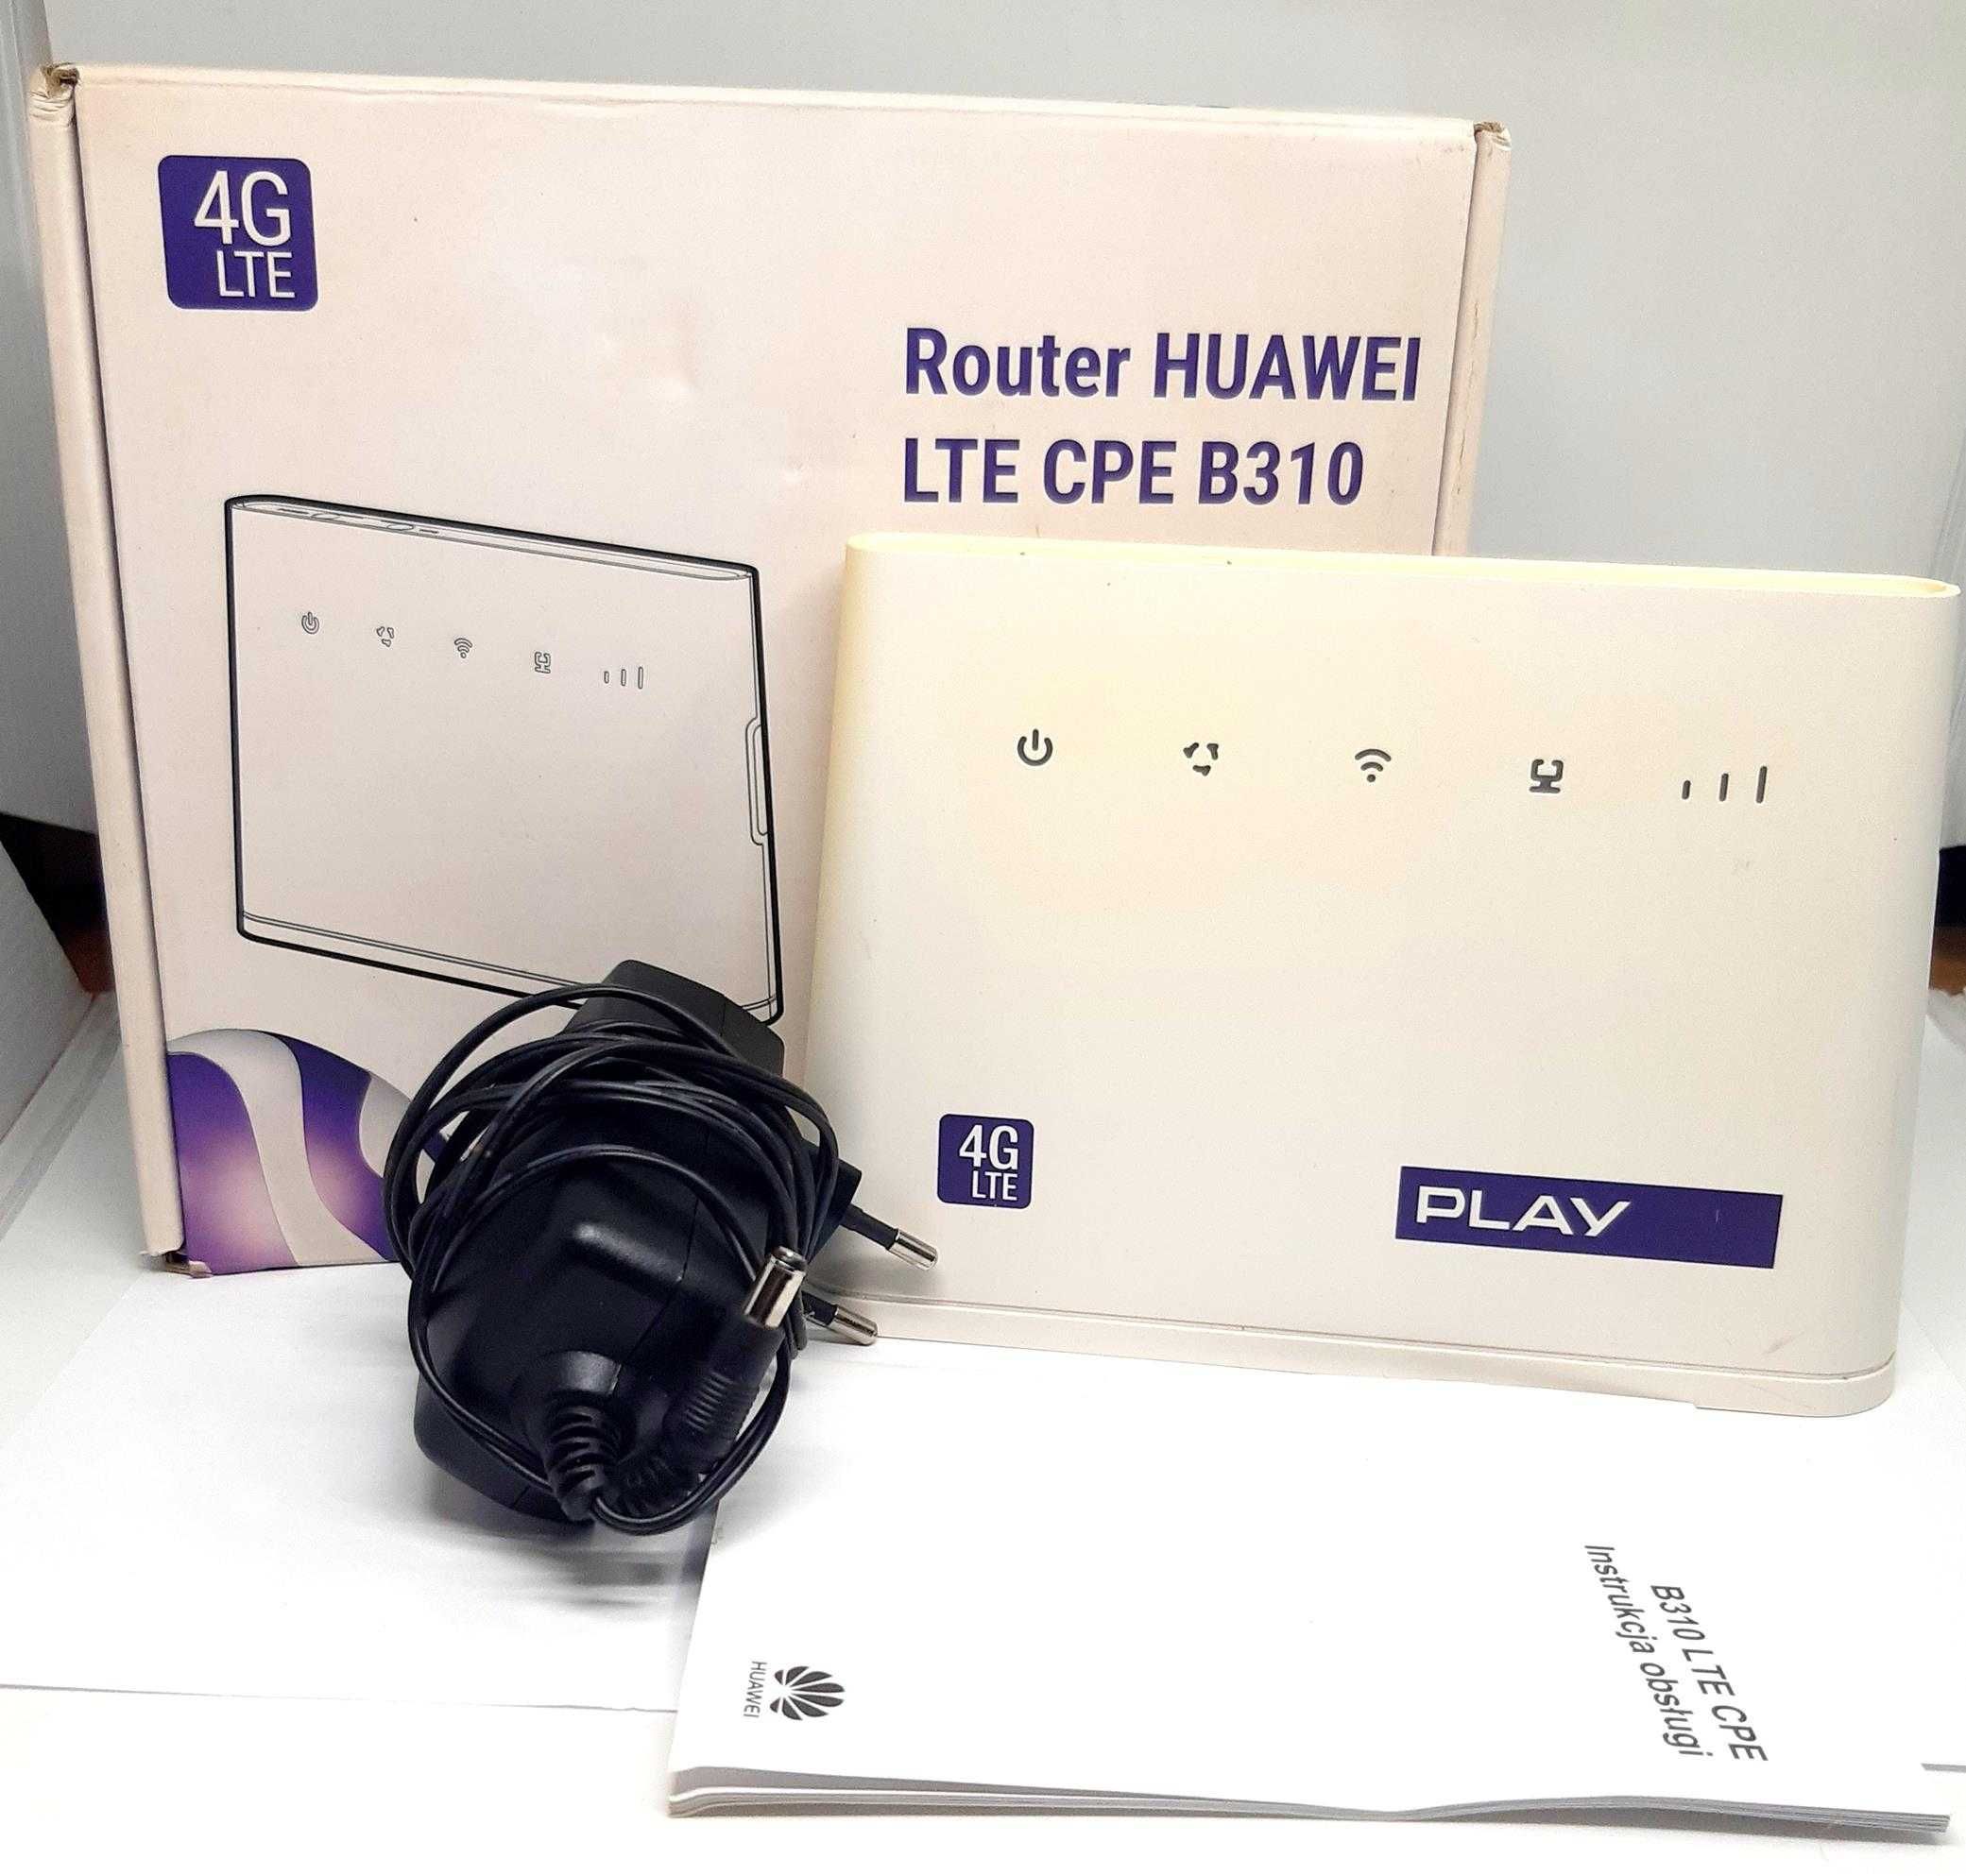 Router HUAWEI LTE CPE B310s-22 używany KOMPLET